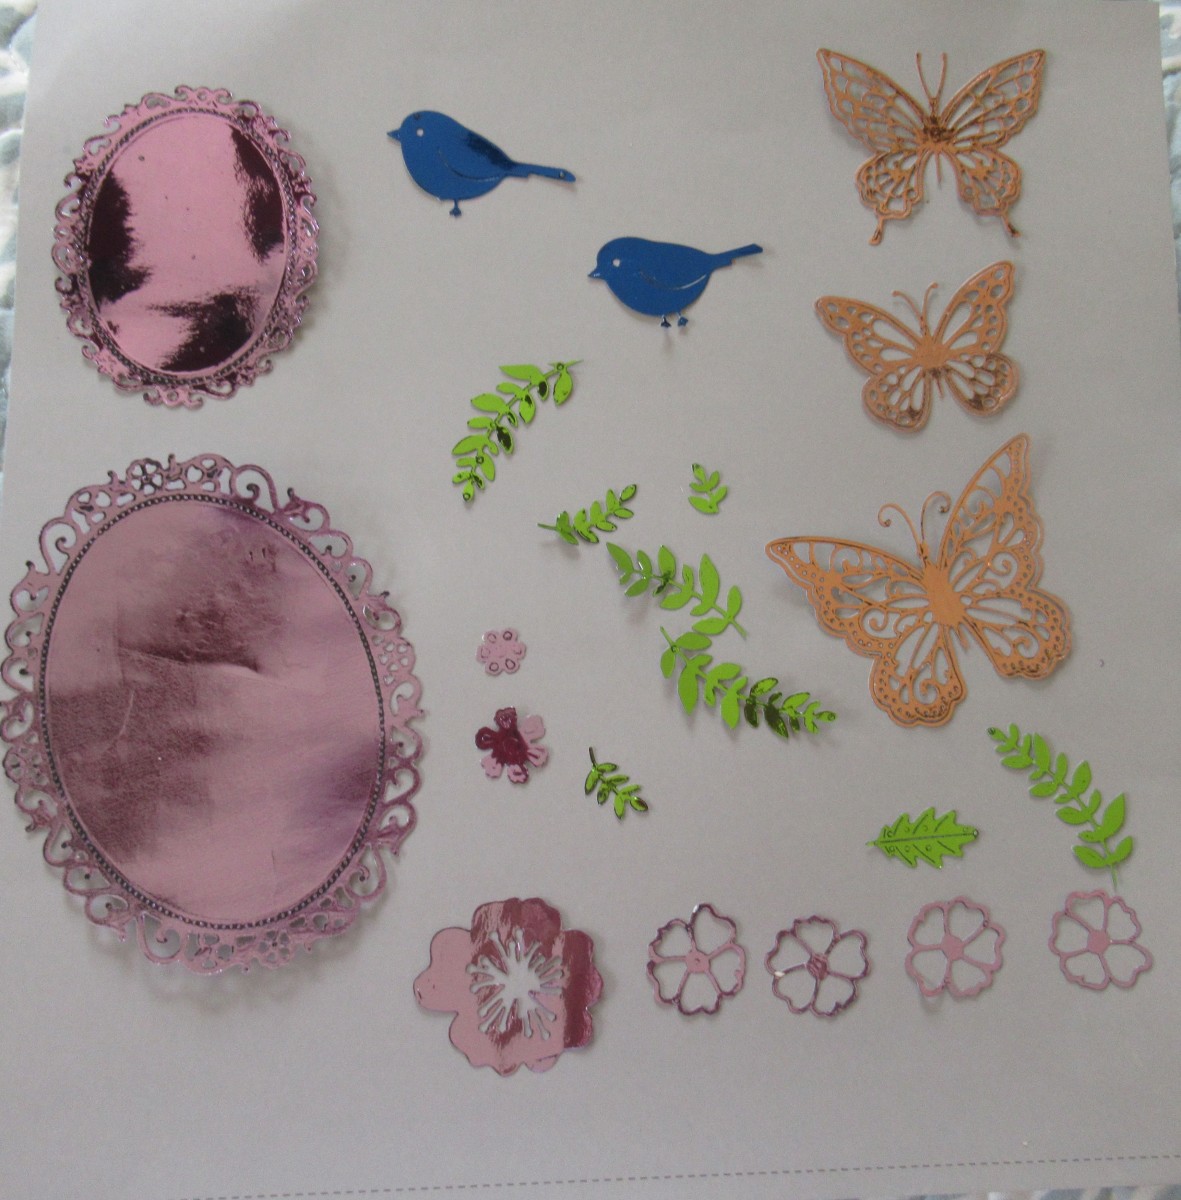 You can die cut toner paper and run it through a laminator to create amazing embellishments for your scrapbooks, cards and journals